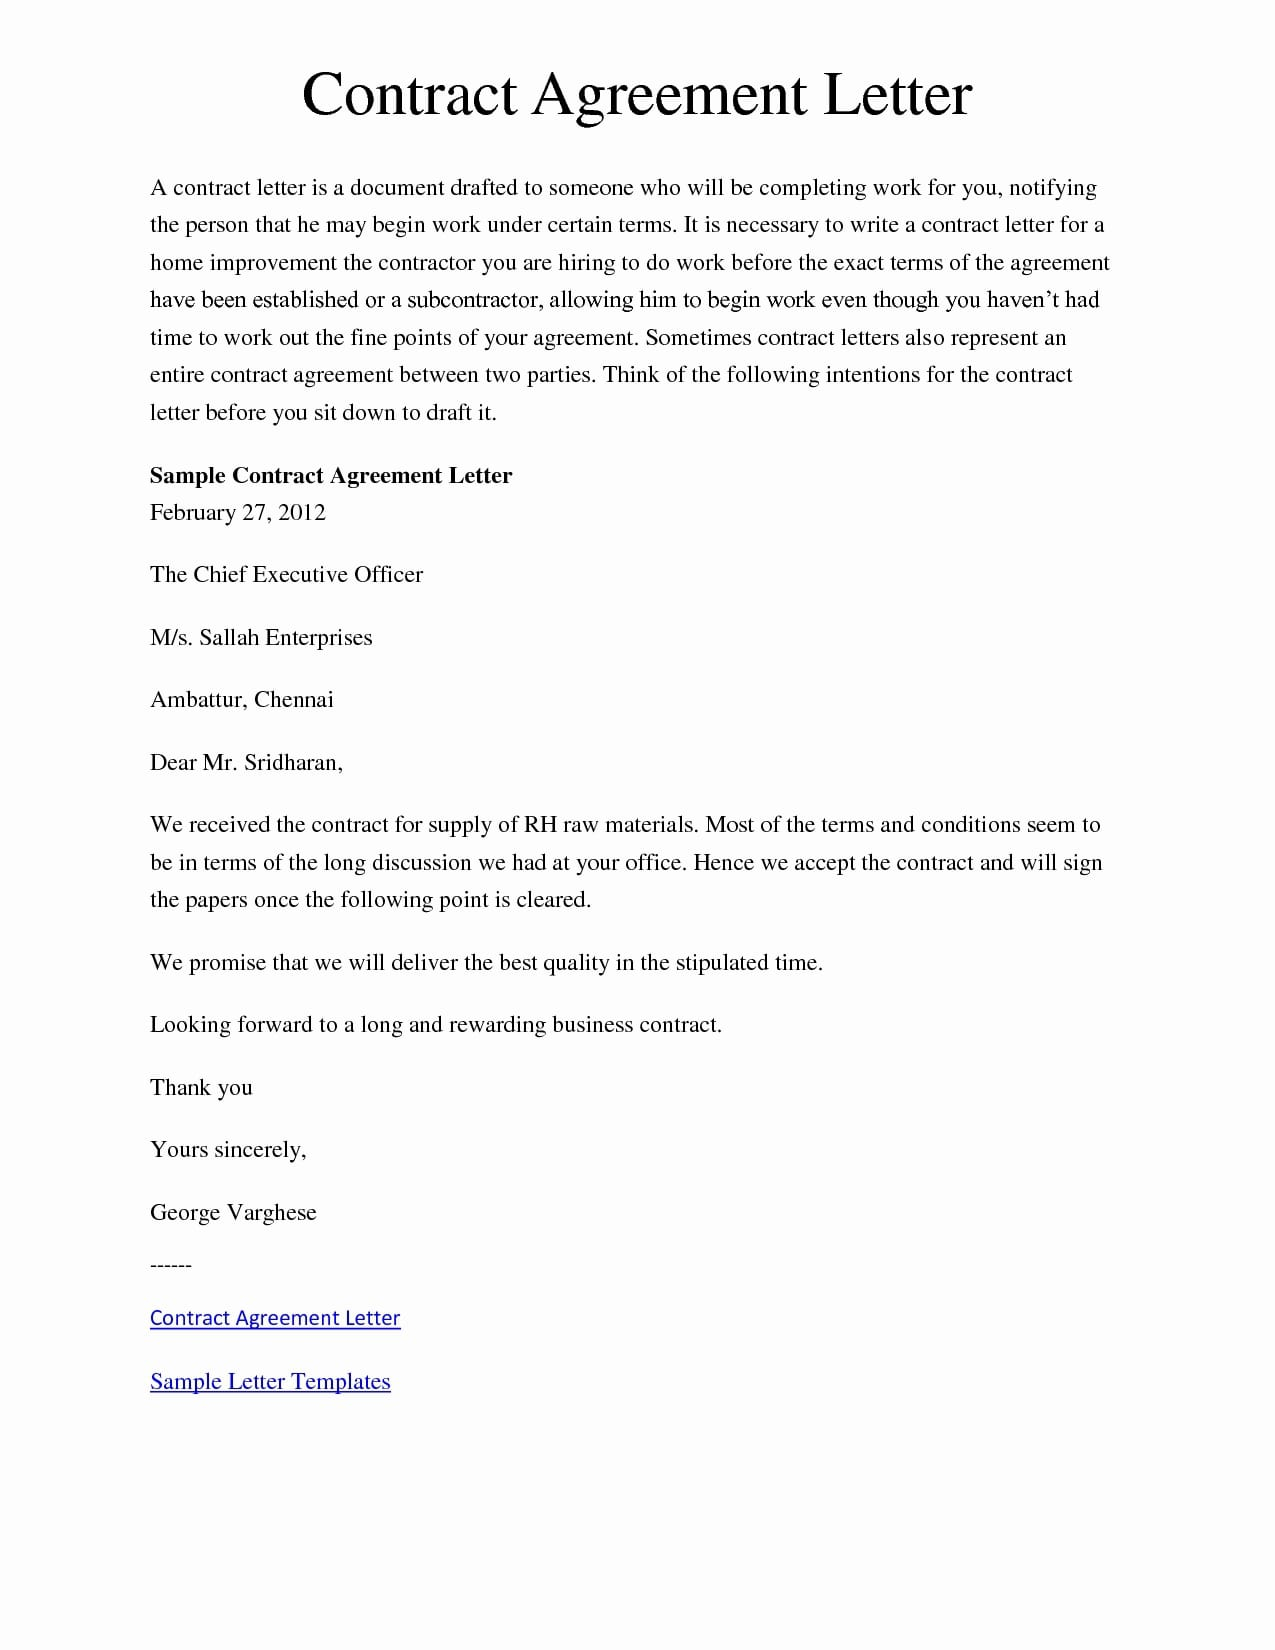 Business Contract Agreement 9 Contract Agreement Letter Examples Pdf Examples